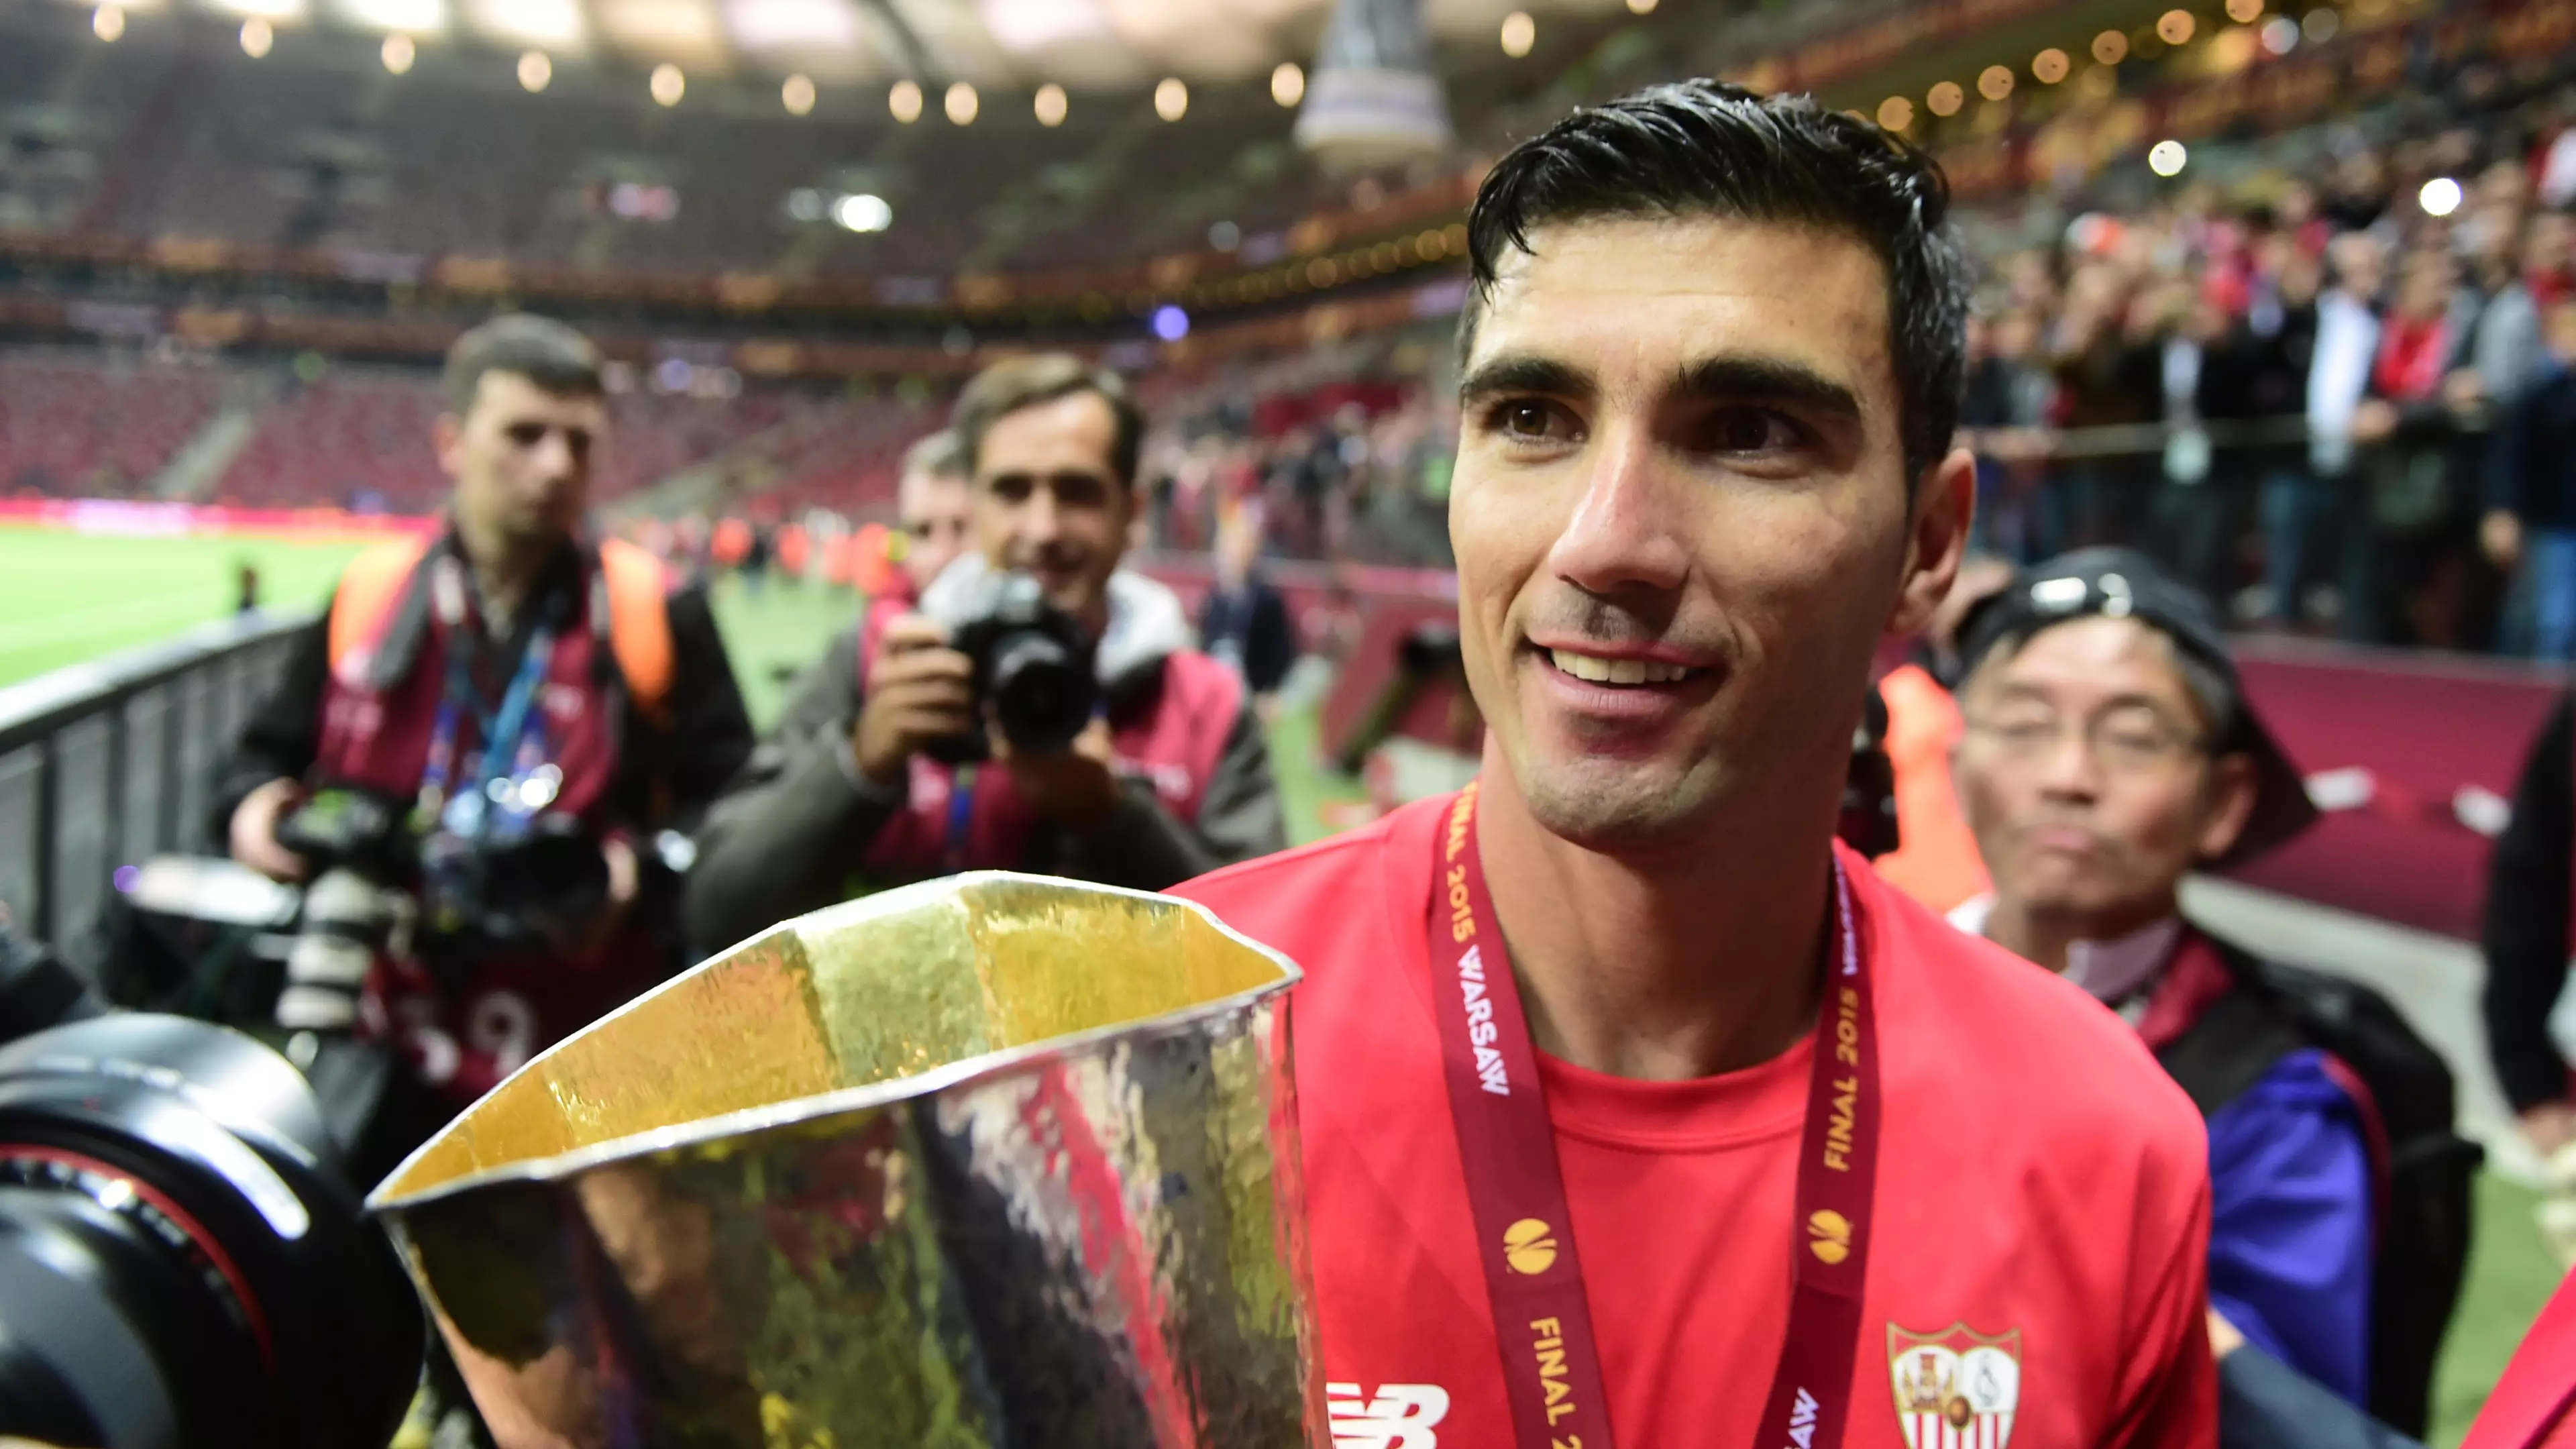 UEFA To Hold Minute's Silence For Jose Antonio Reyes Ahead Of Champions League Final